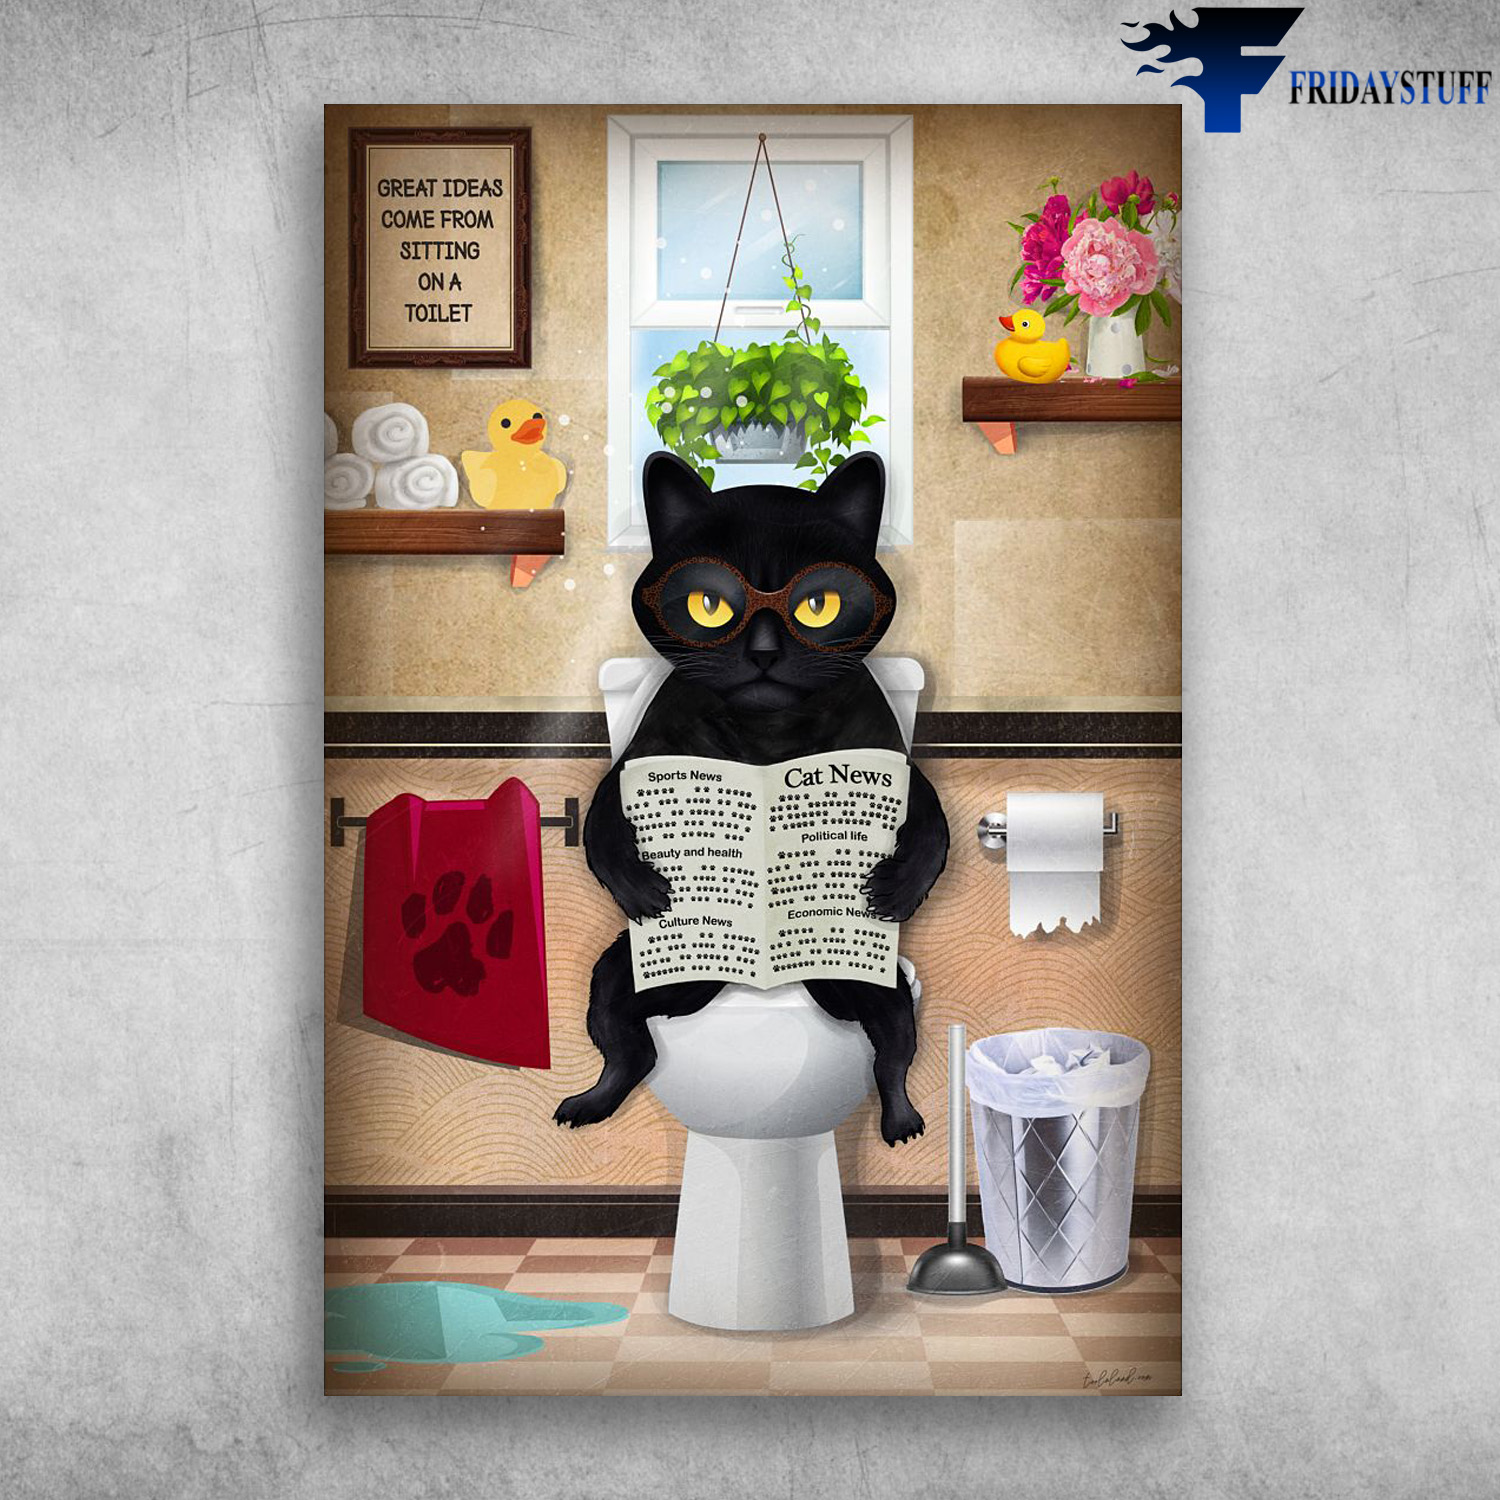 Black Cat In The Toilet - Great Ideas Come From Sitting On A Toilet